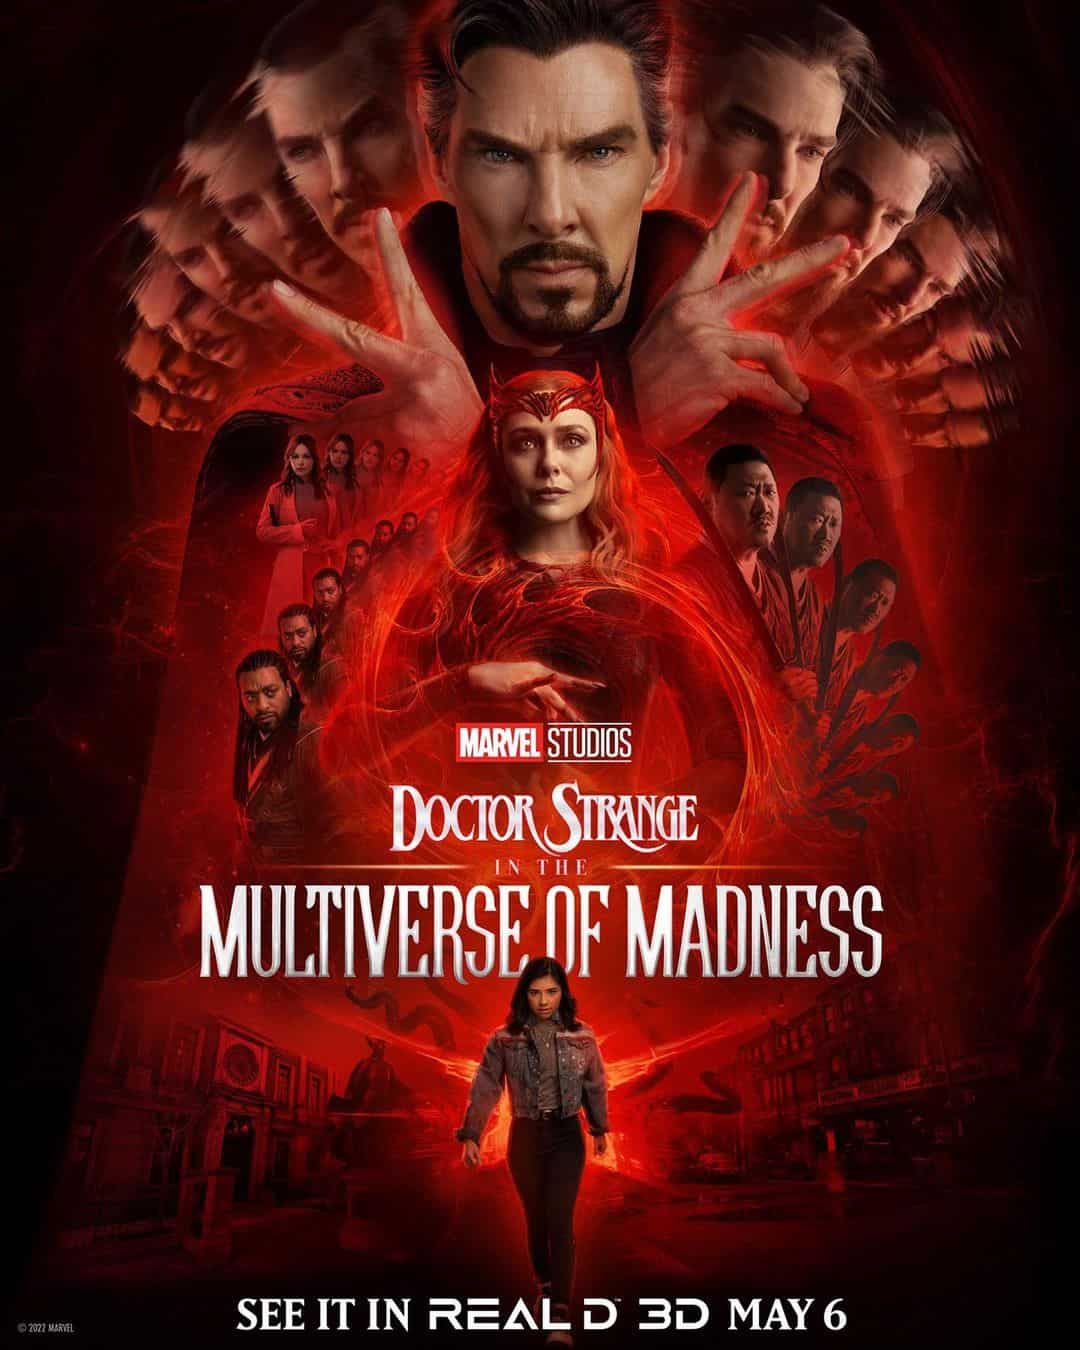 New theatrical posters for Doctor Strange in the Multiverse of Madness are out